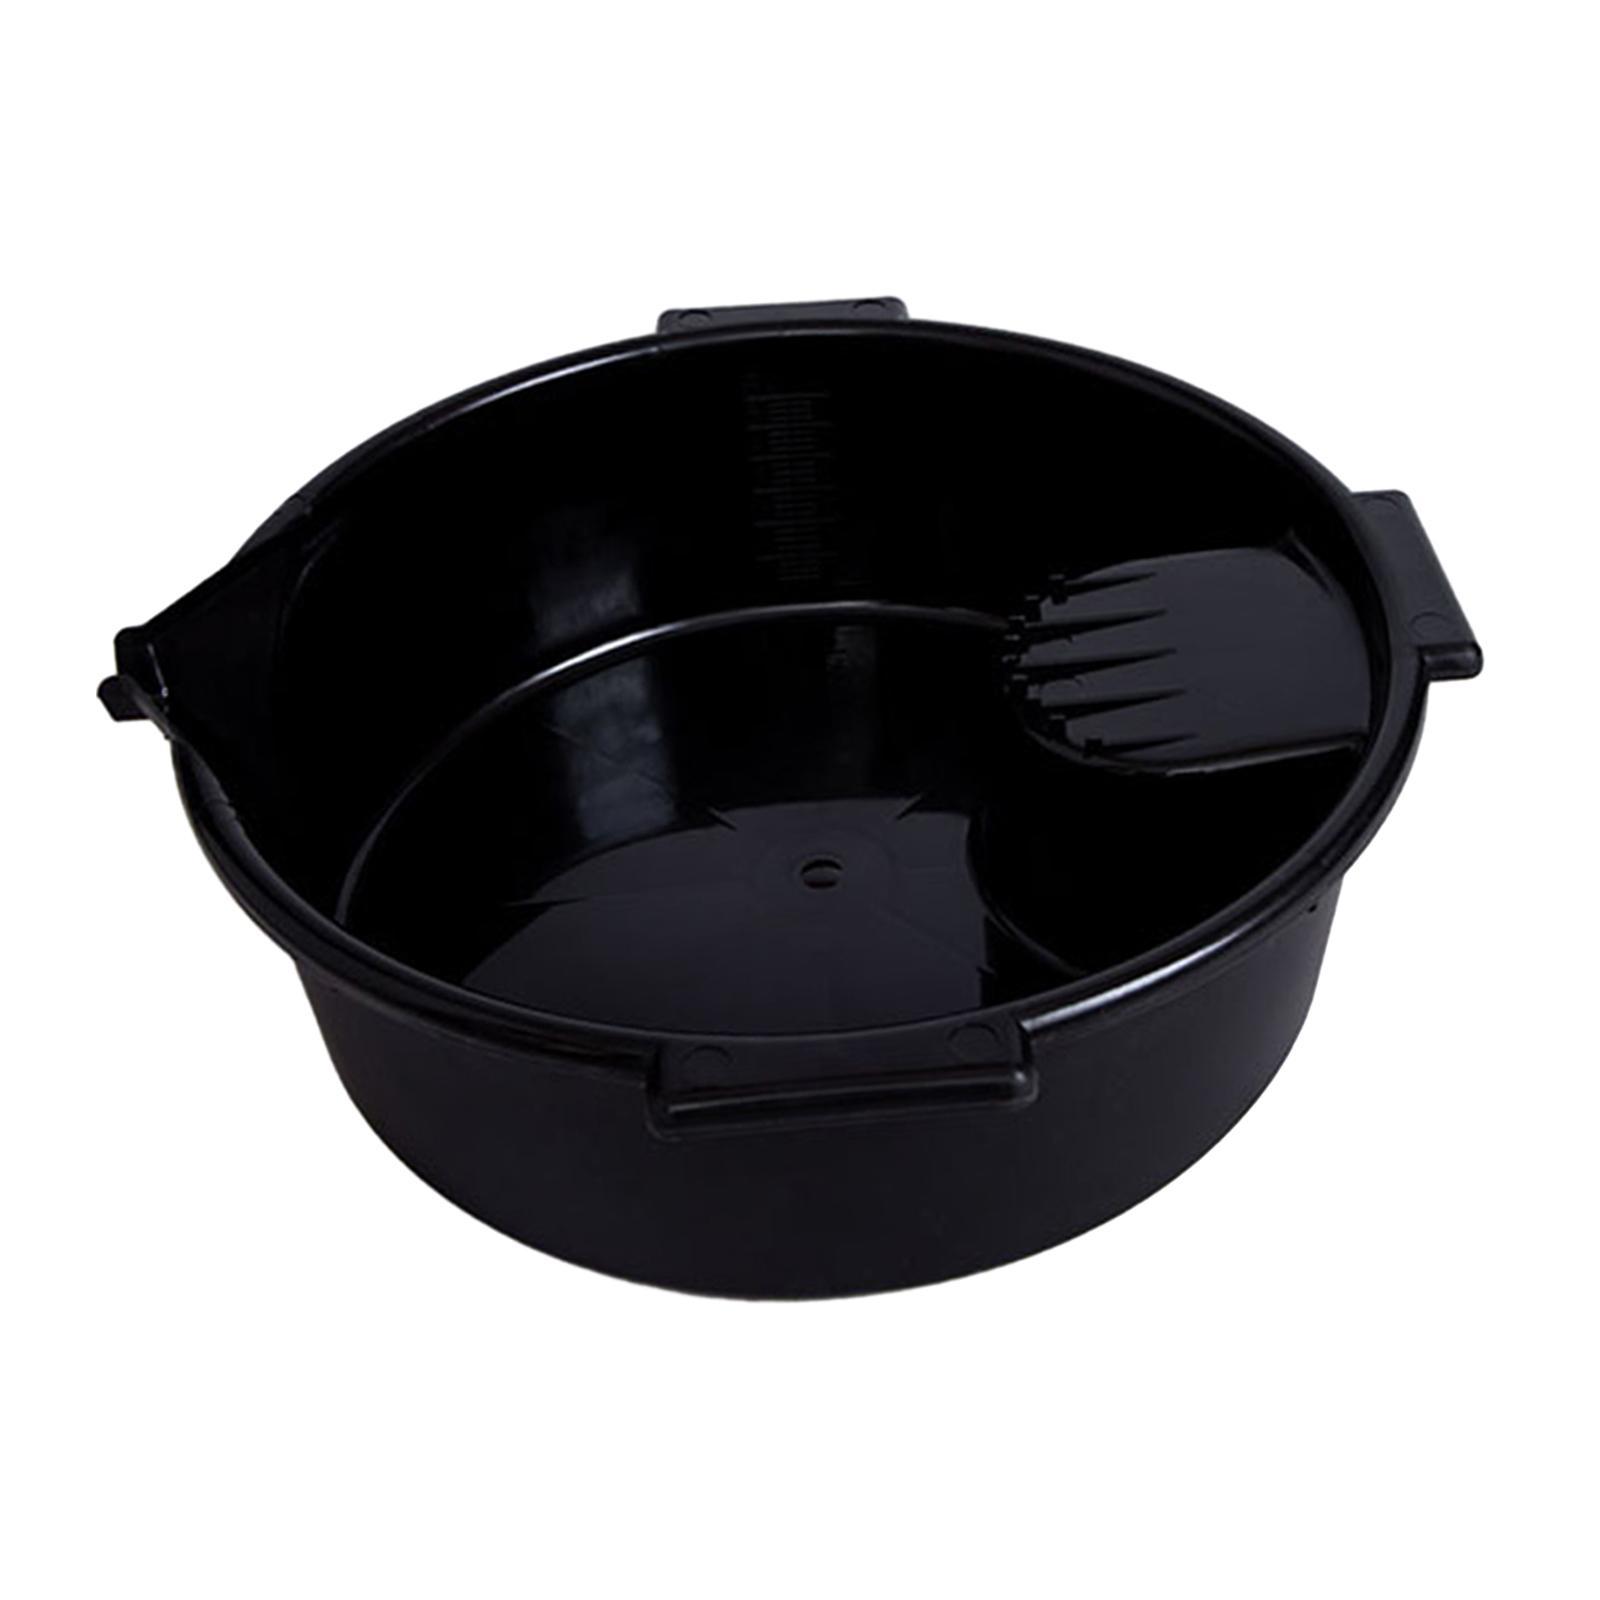 Oil Drain Container Oil Change Pan Heavy Duty Easy Cleaning Prevents Spills Anti  Motor Oil  Pan for Cars Motorcycle